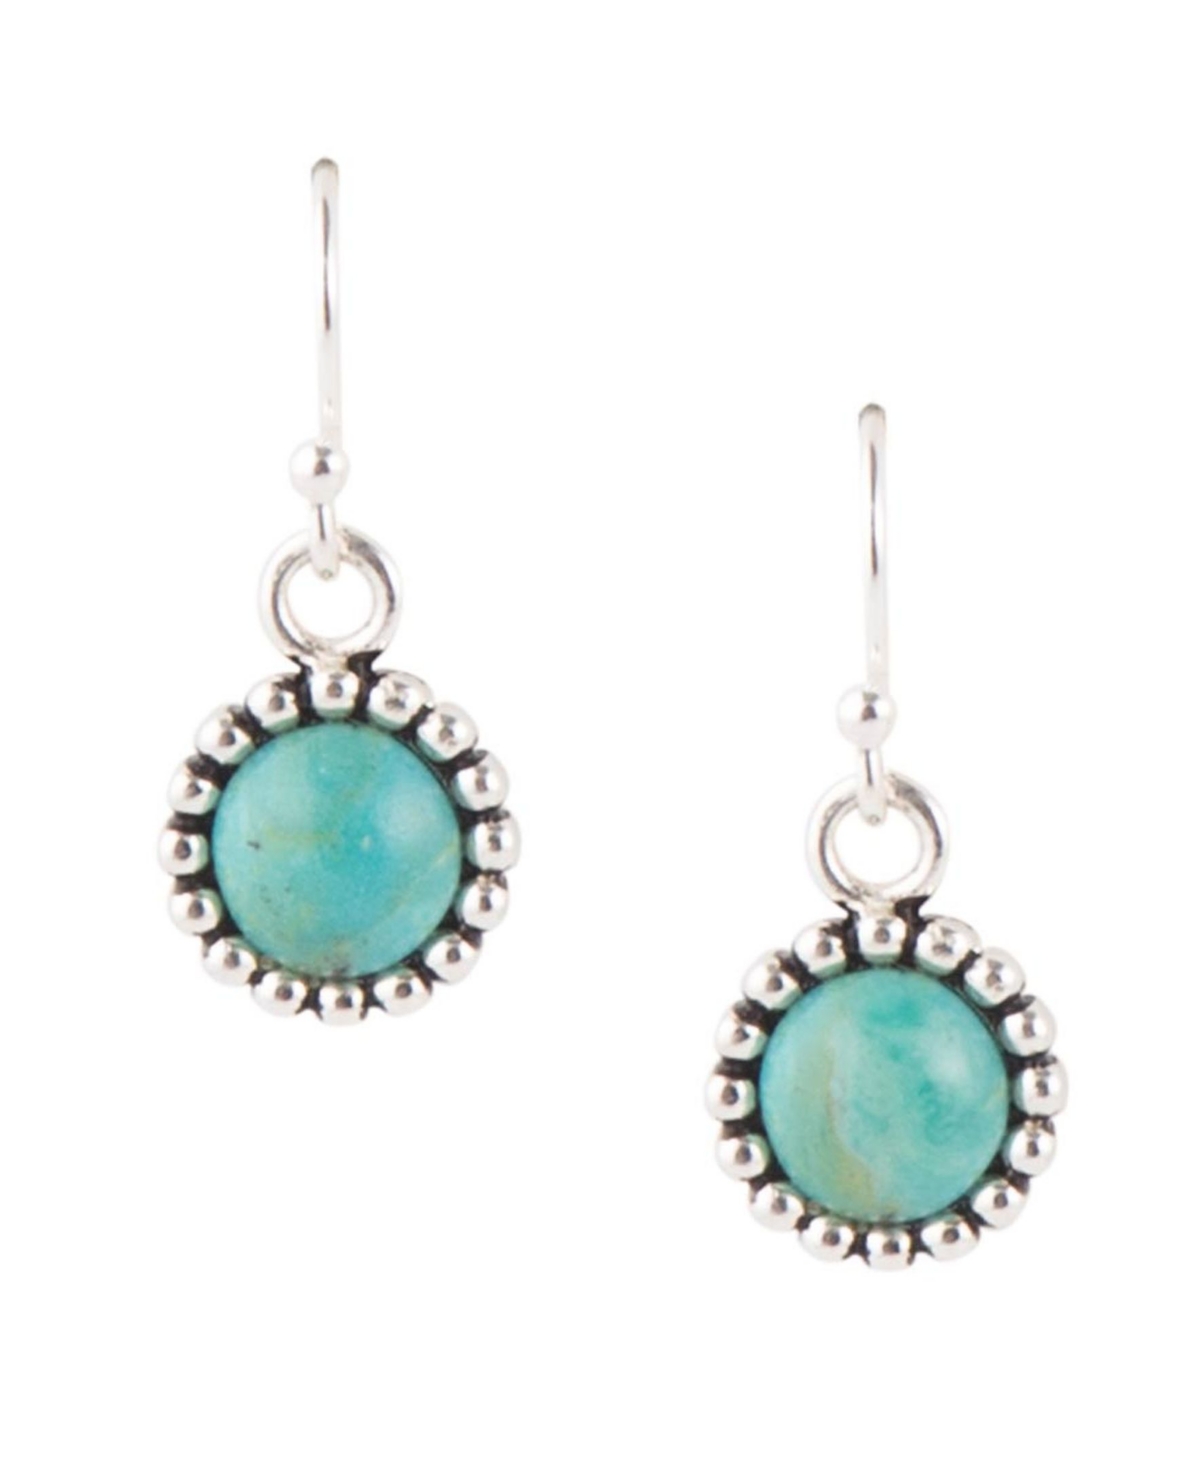 Everyday Dainty Earrings - Turquoise